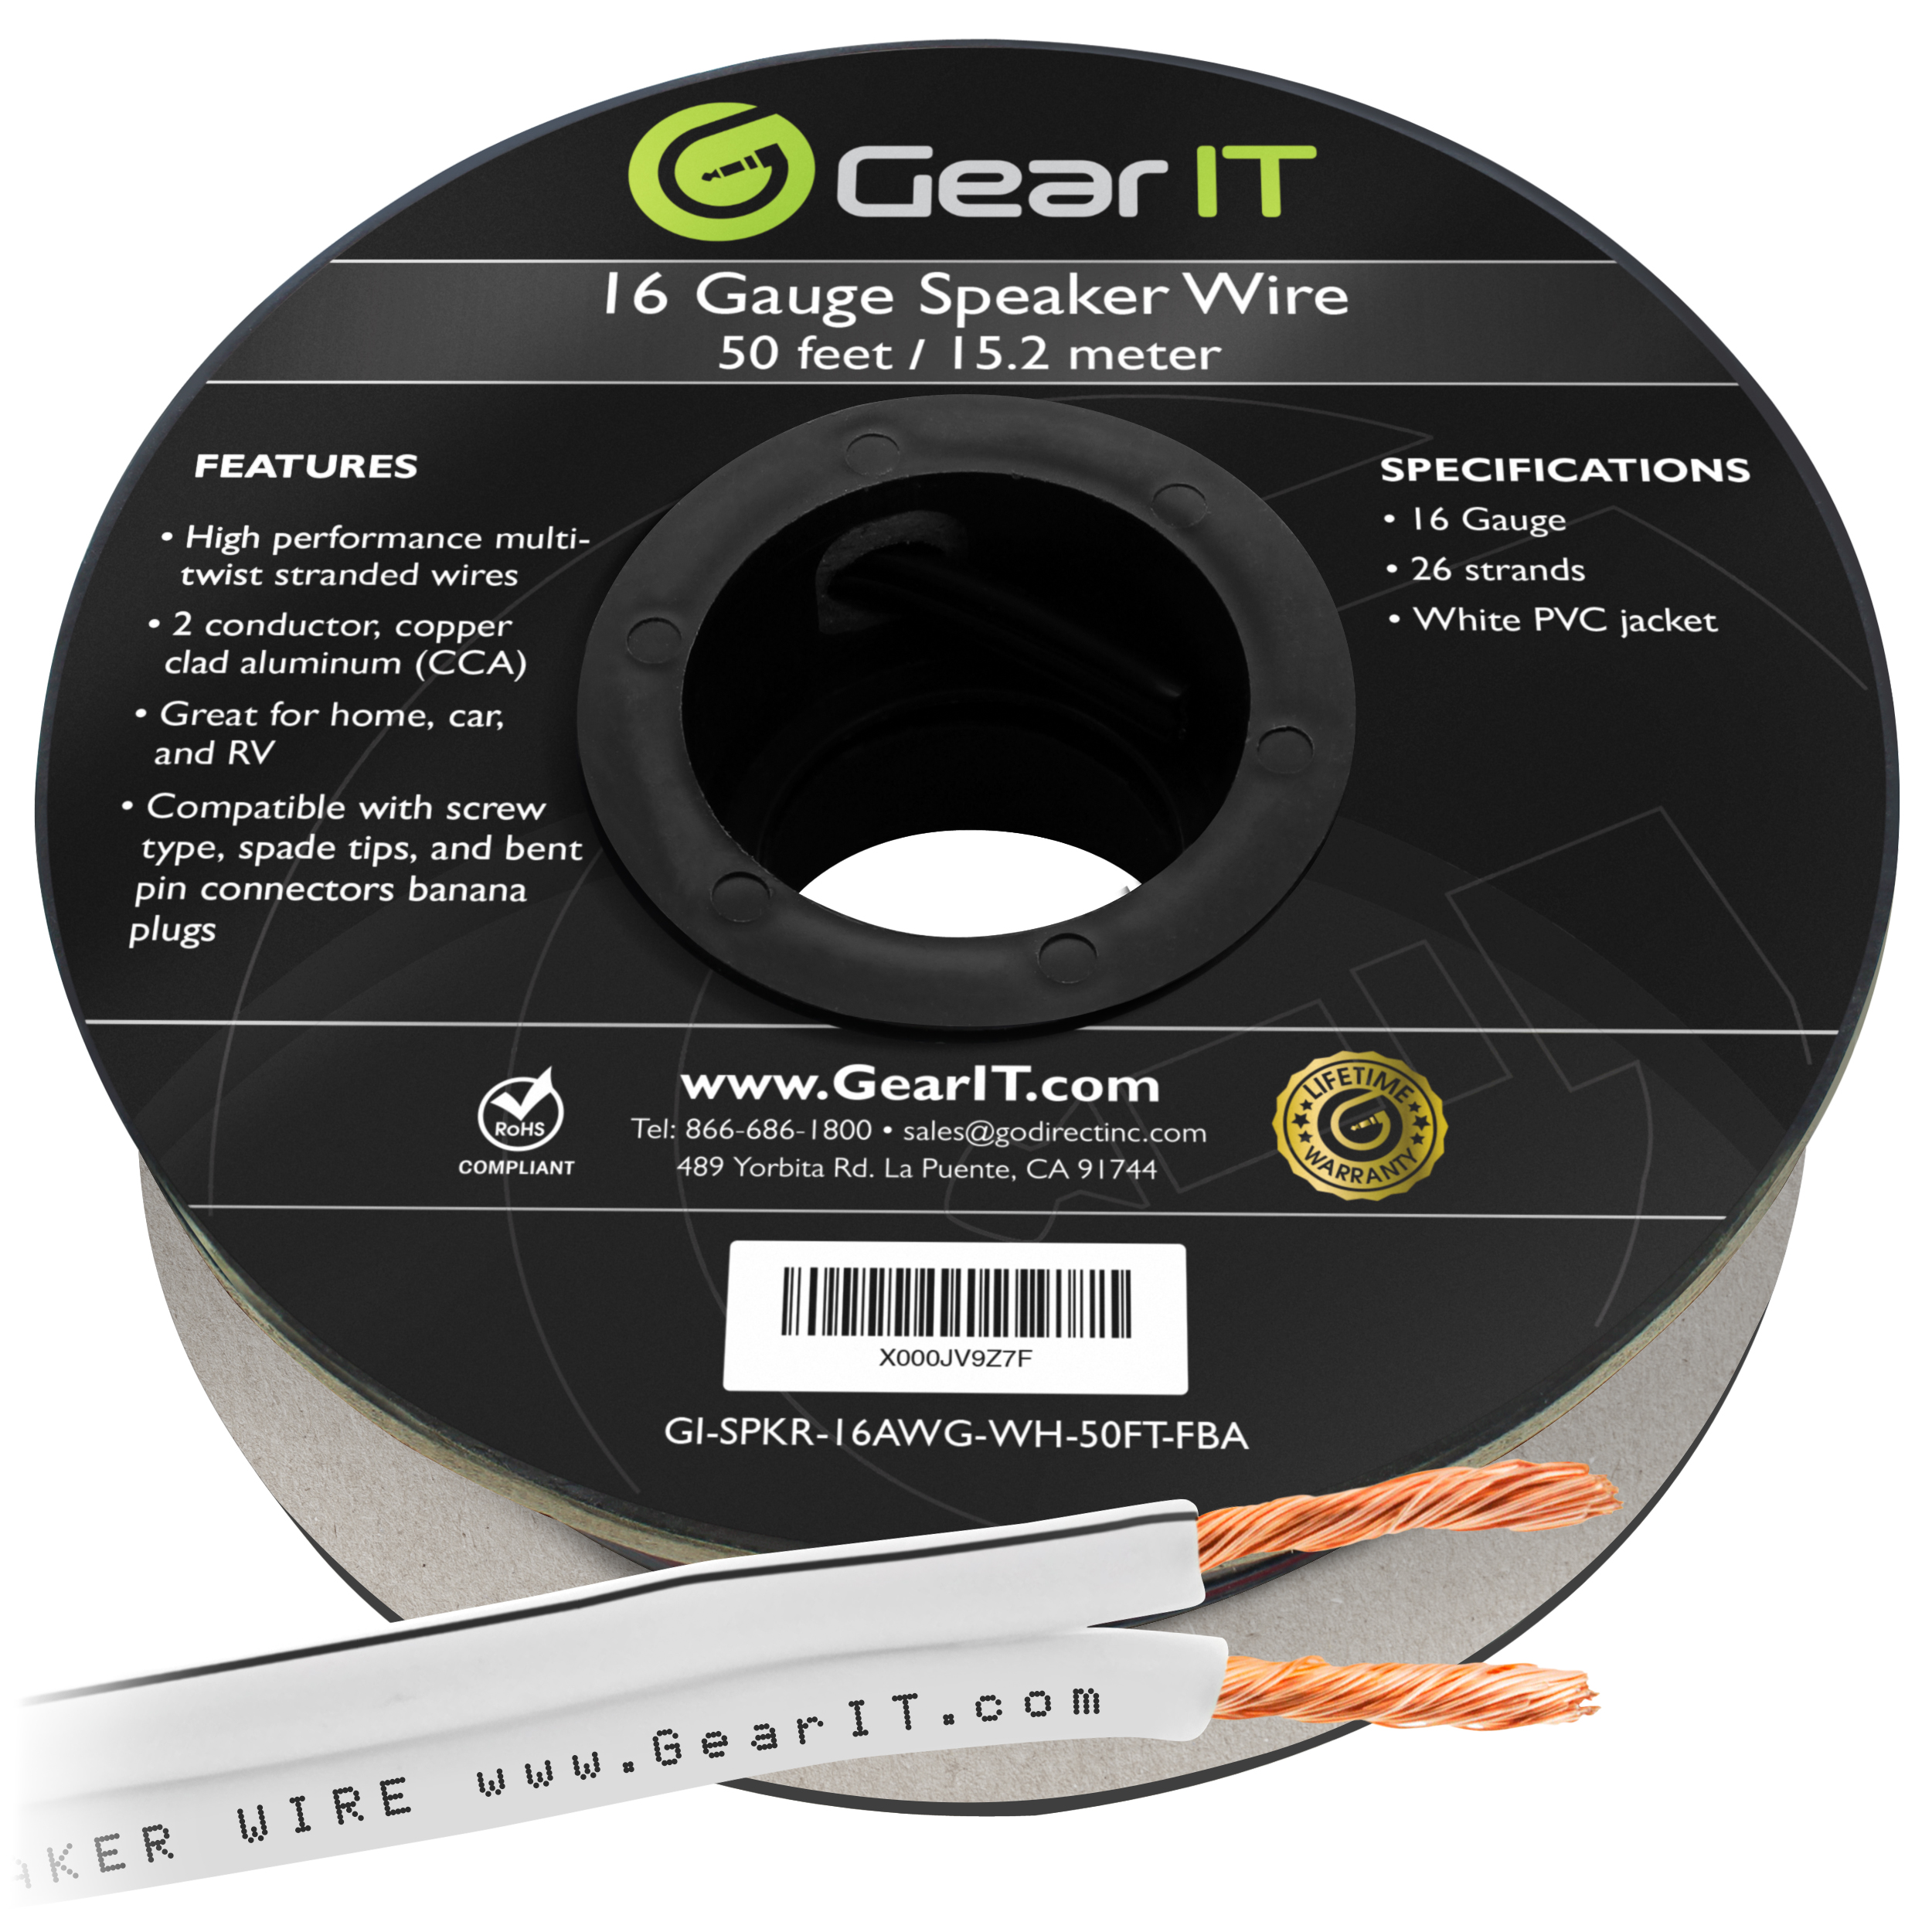 16AWG Speaker Wire, GearIT Pro Series 16 Gauge Speaker Wire Cable (50 Feet / 15 Meters) Great Use for Home Theater Speakers and Car Speakers, White - image 1 of 7